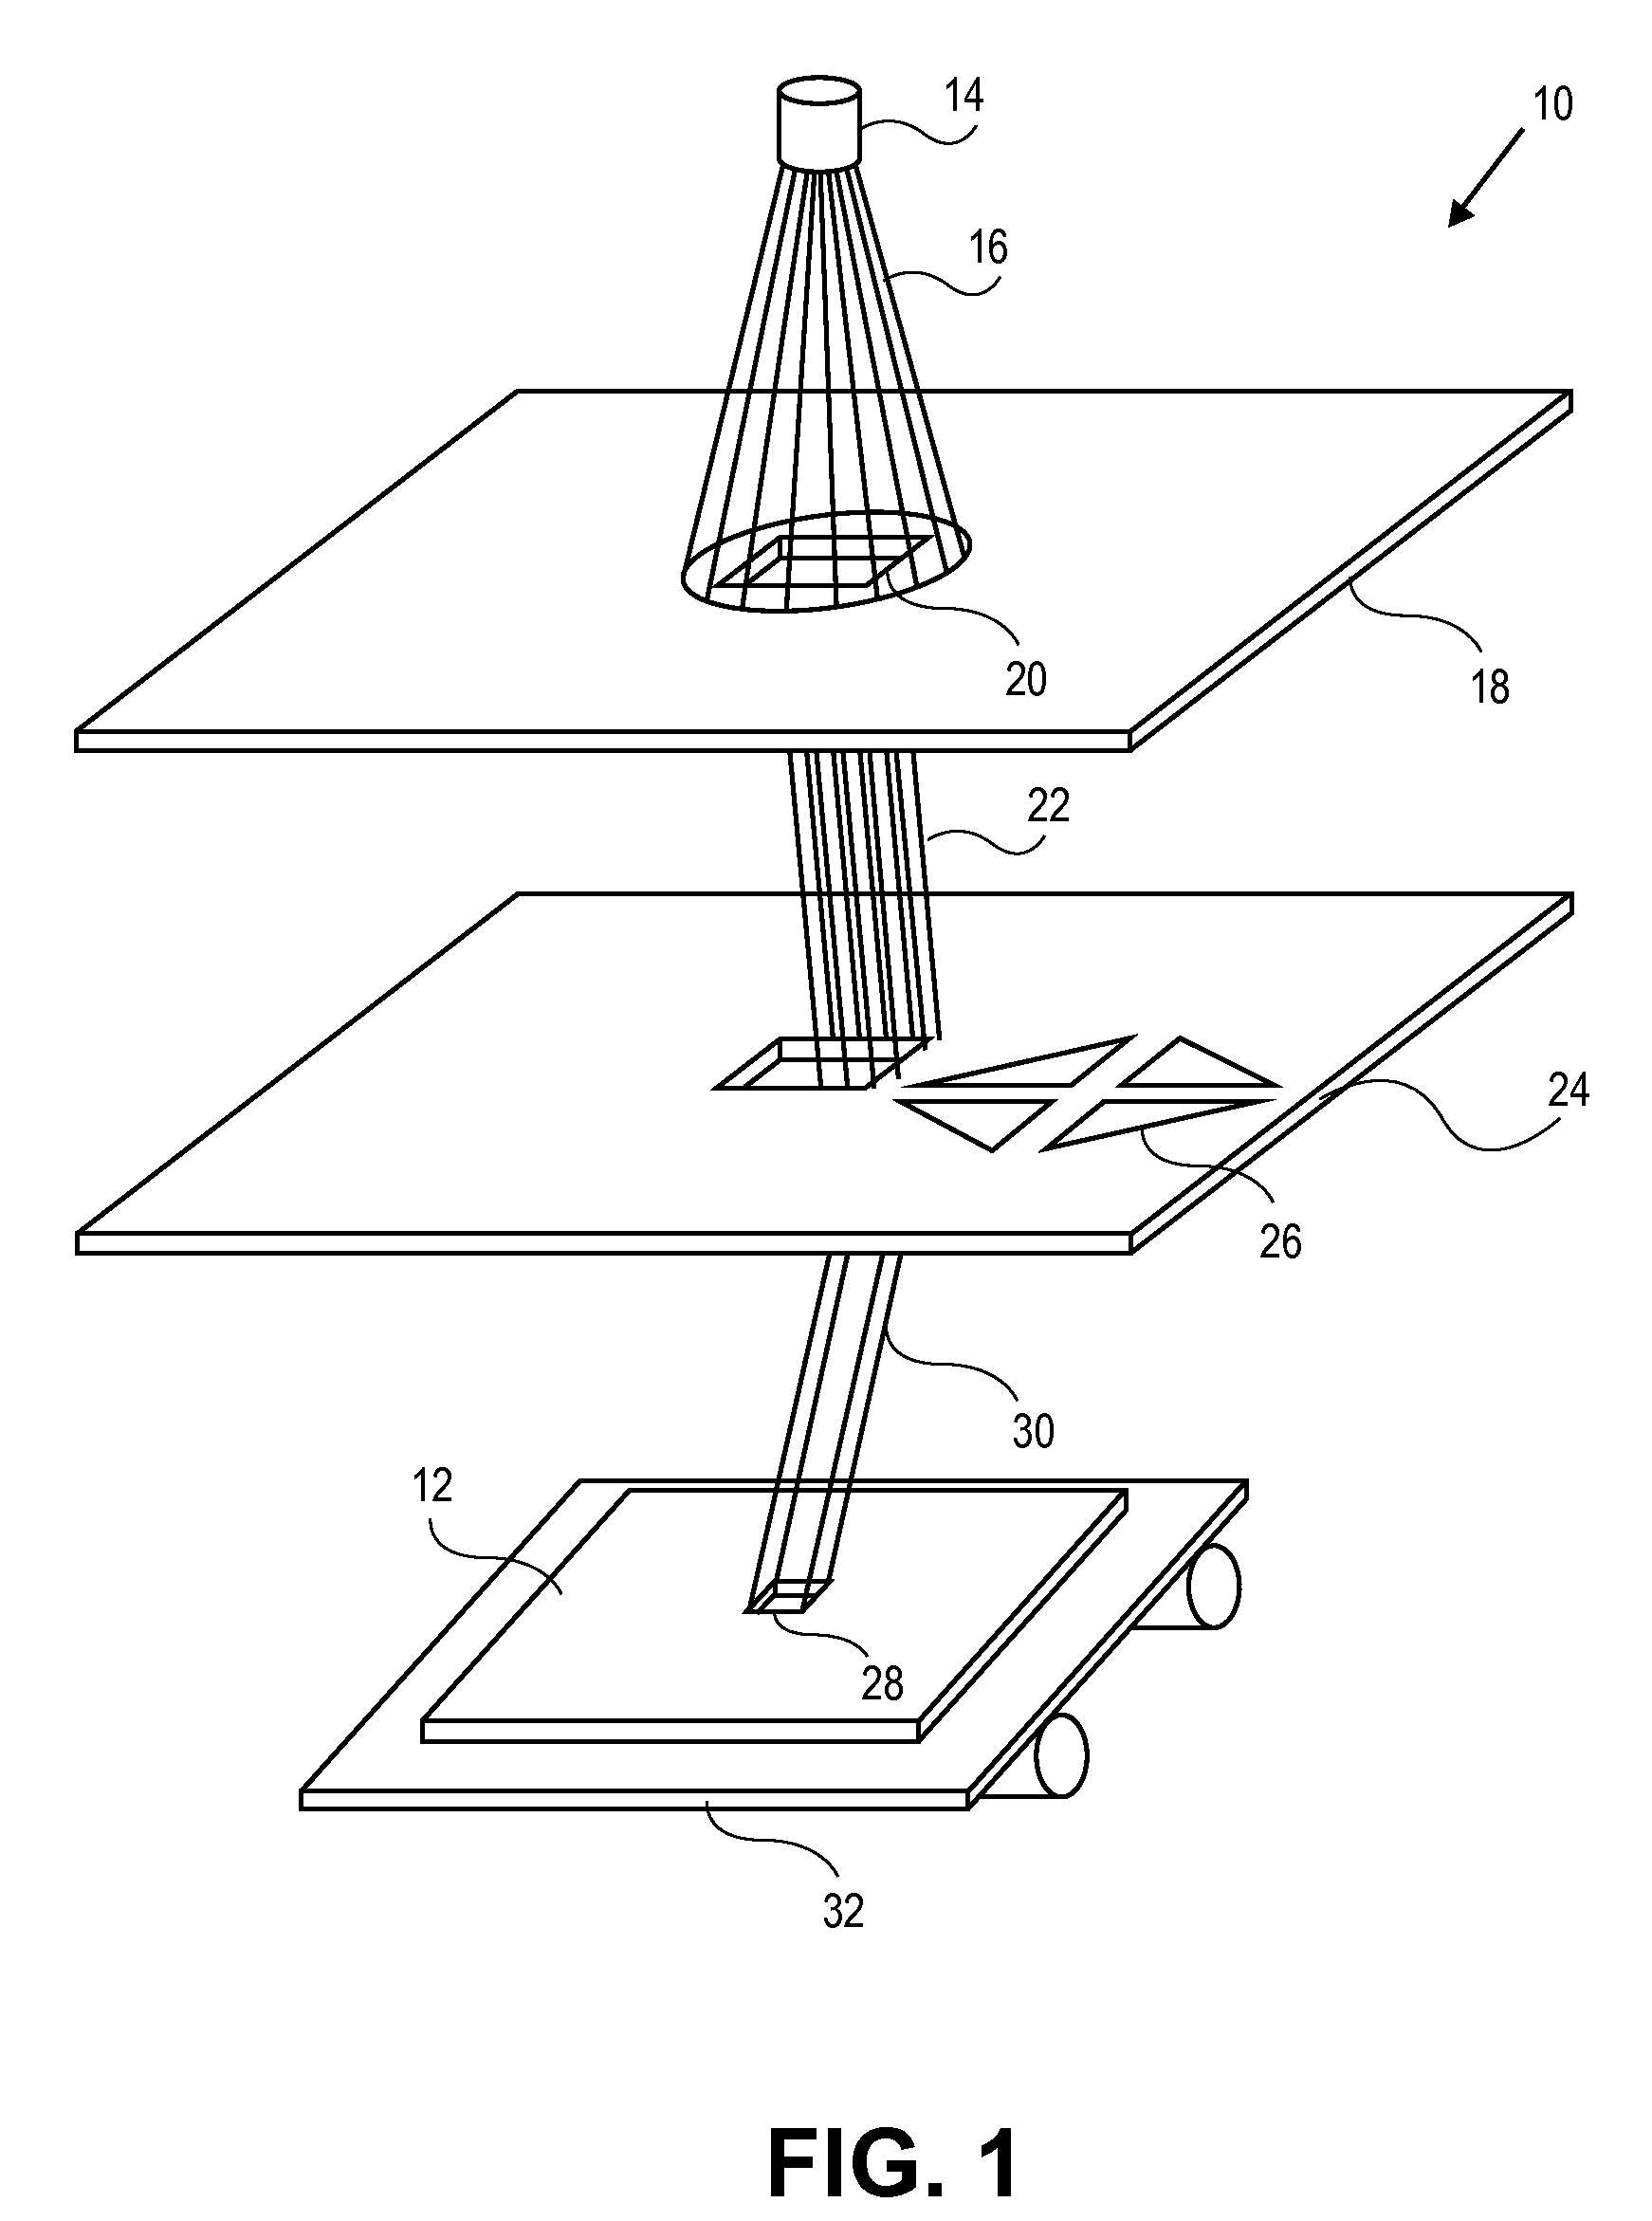 Method for design and manufacture of a reticle using variable shaped beam lithography